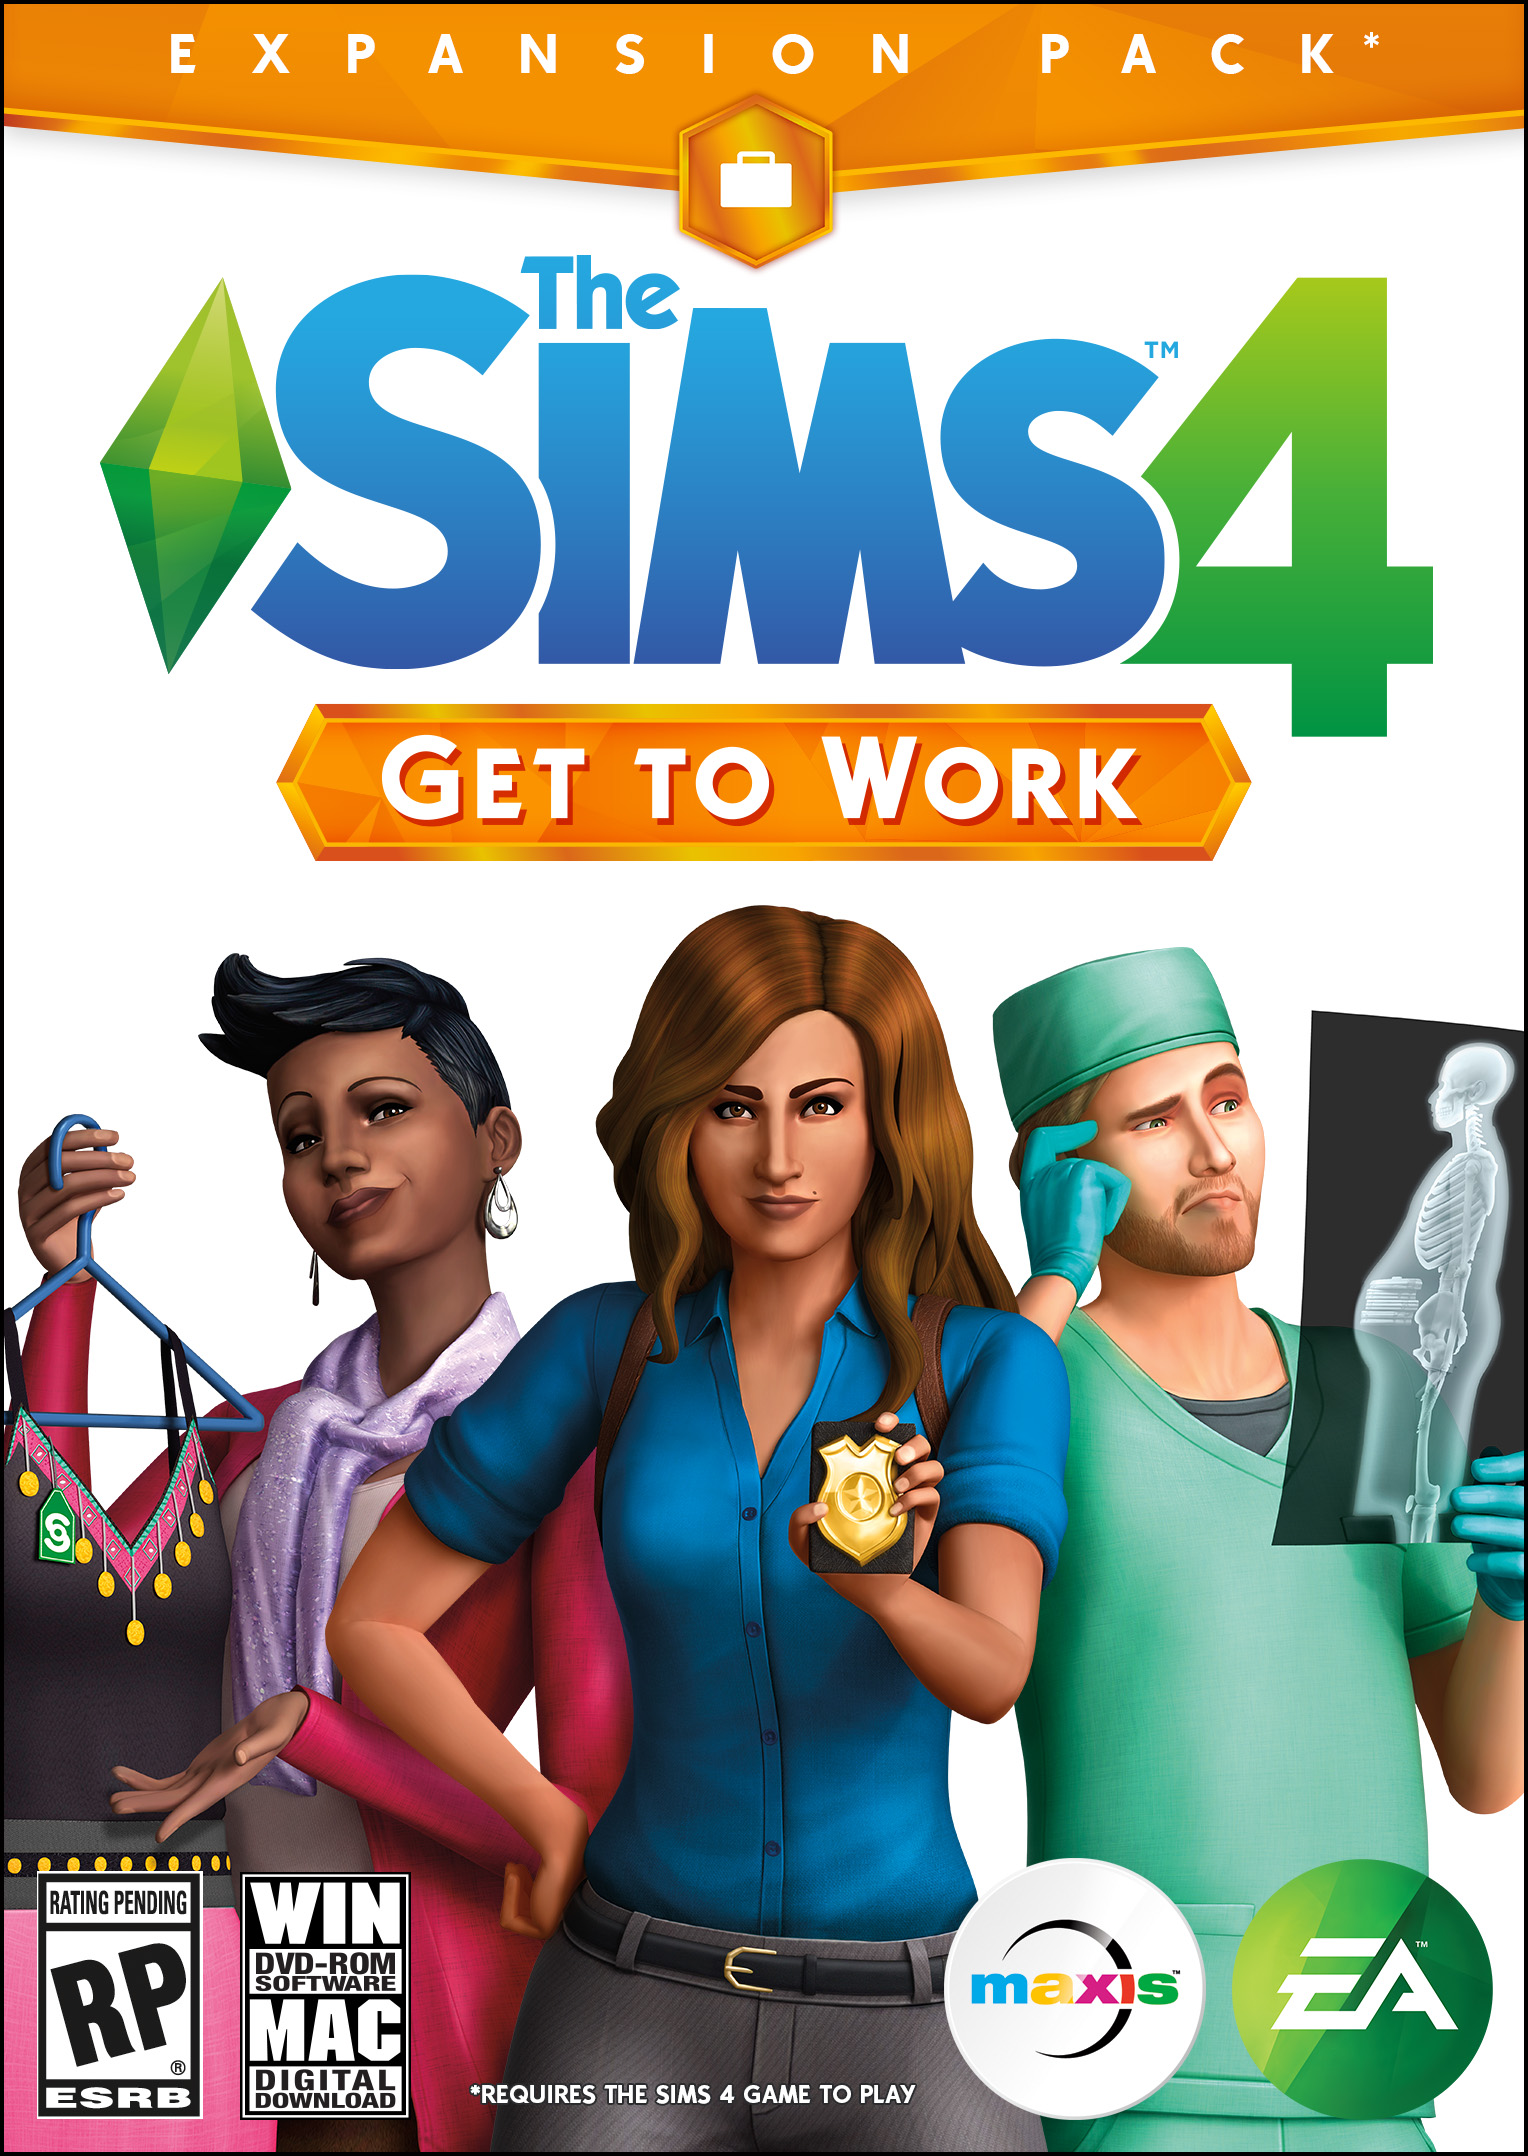 The sims 4 get to work download code